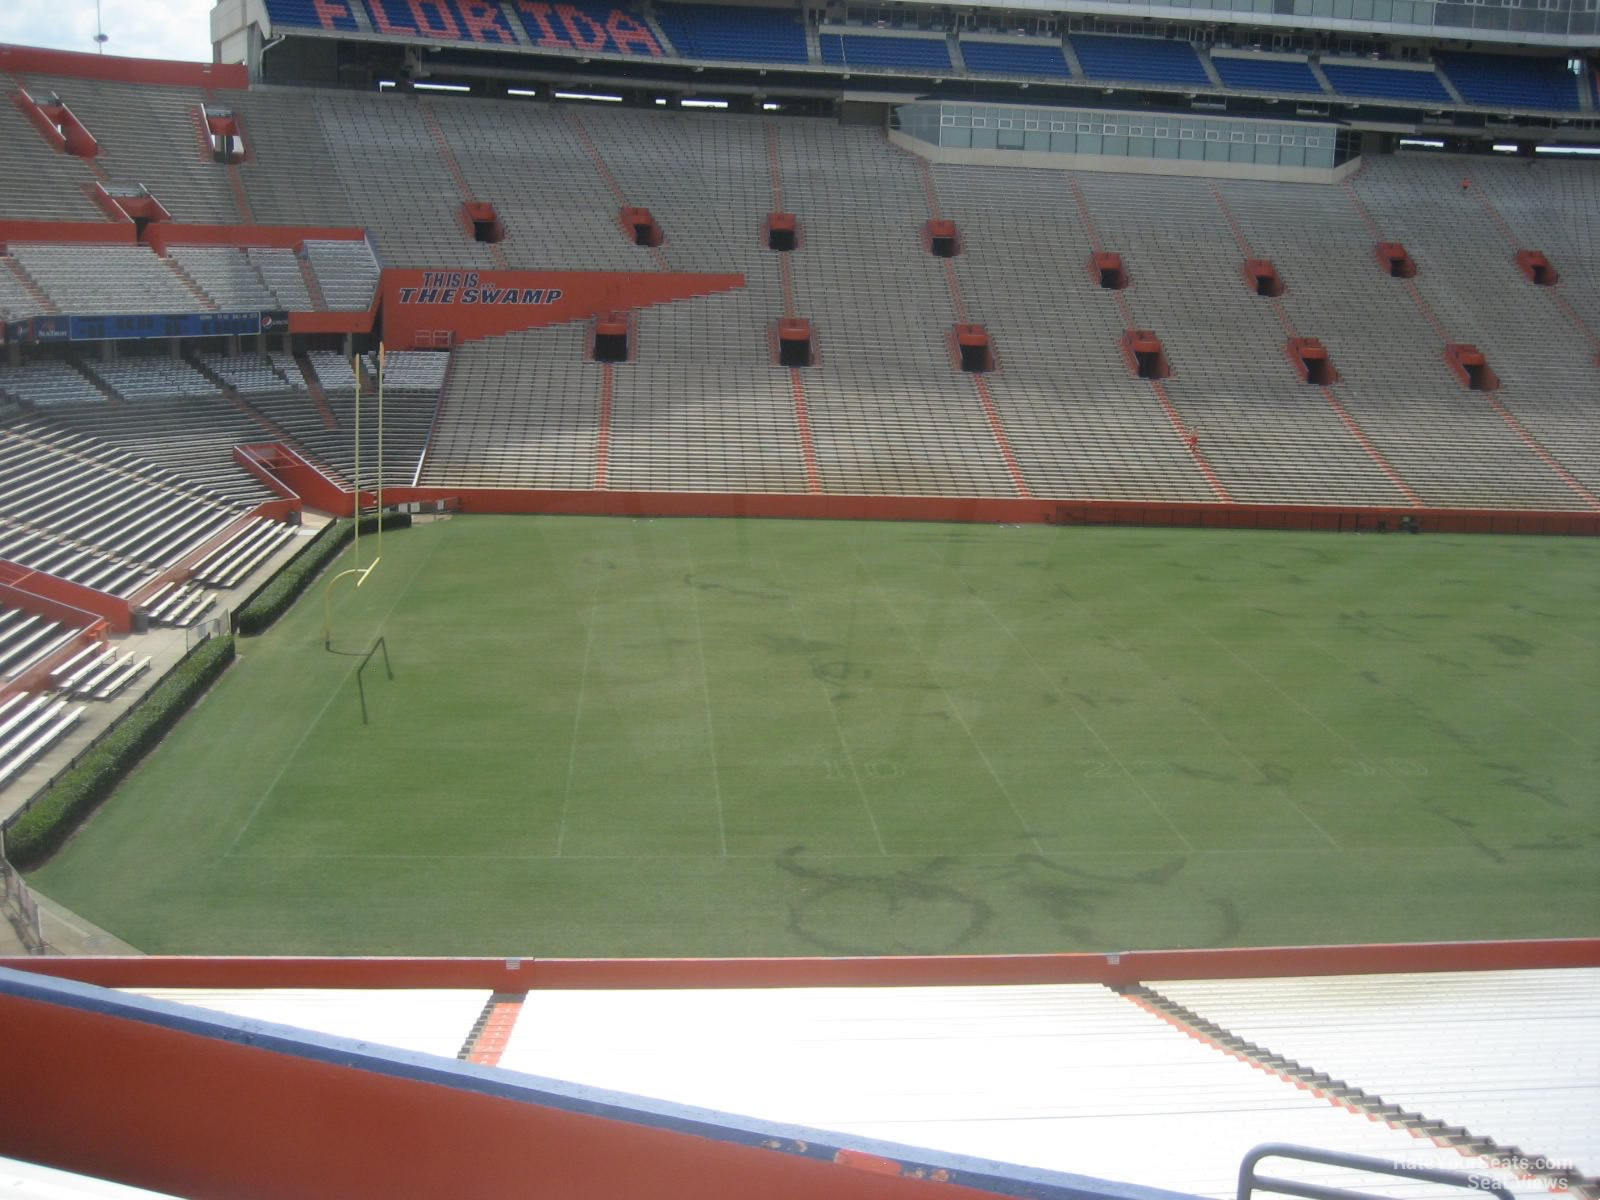 section 43, row 58 seat view  - ben hill griffin stadium